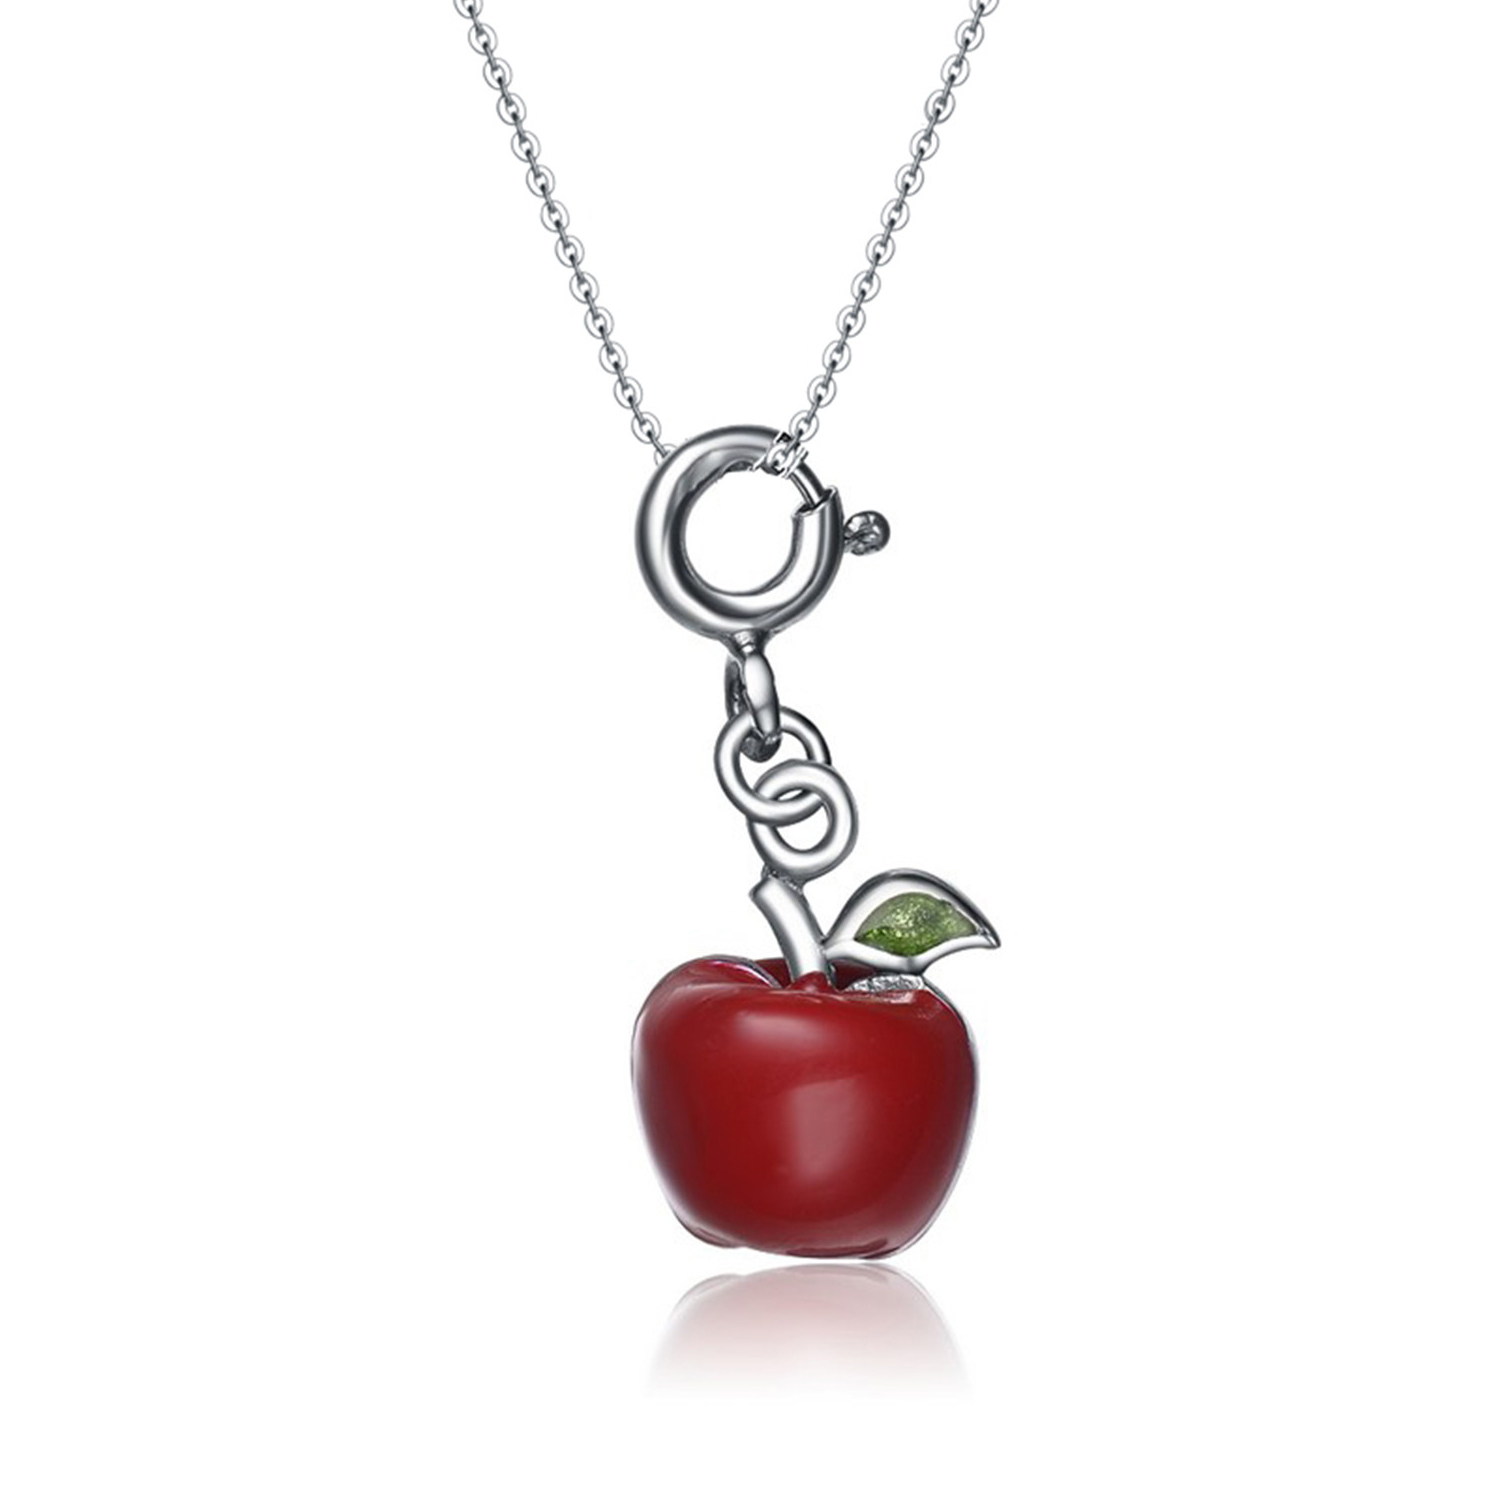 New Arrival 925 sterling silver rhodium plated jewelry fruit pendant necklace women jewelry (图2)